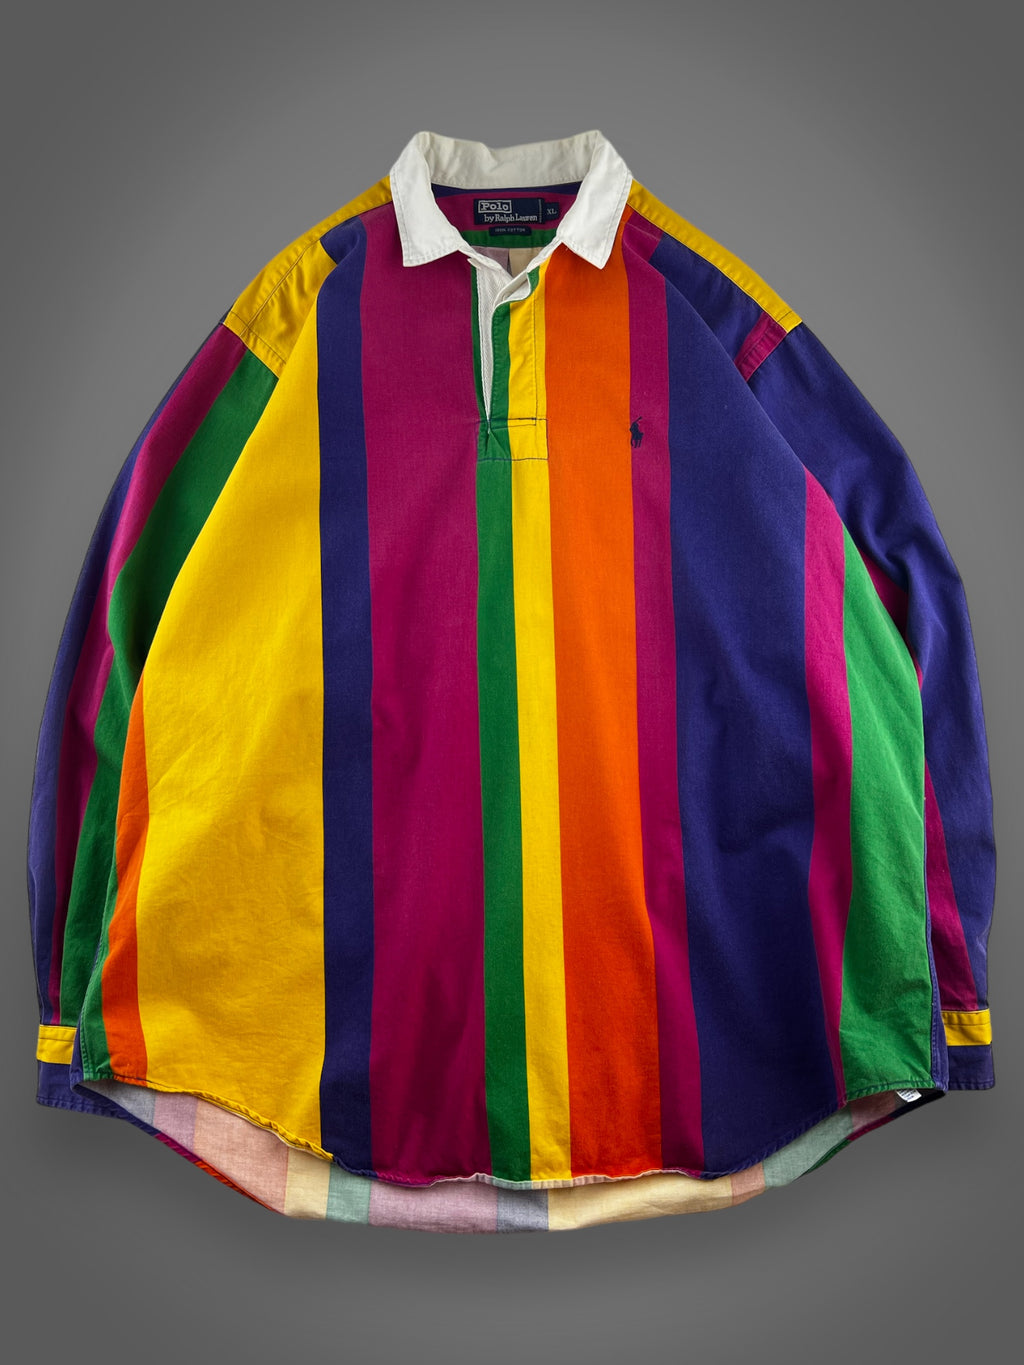 90s Polo Ralph Lauren striped rugby style shirt fits XXL